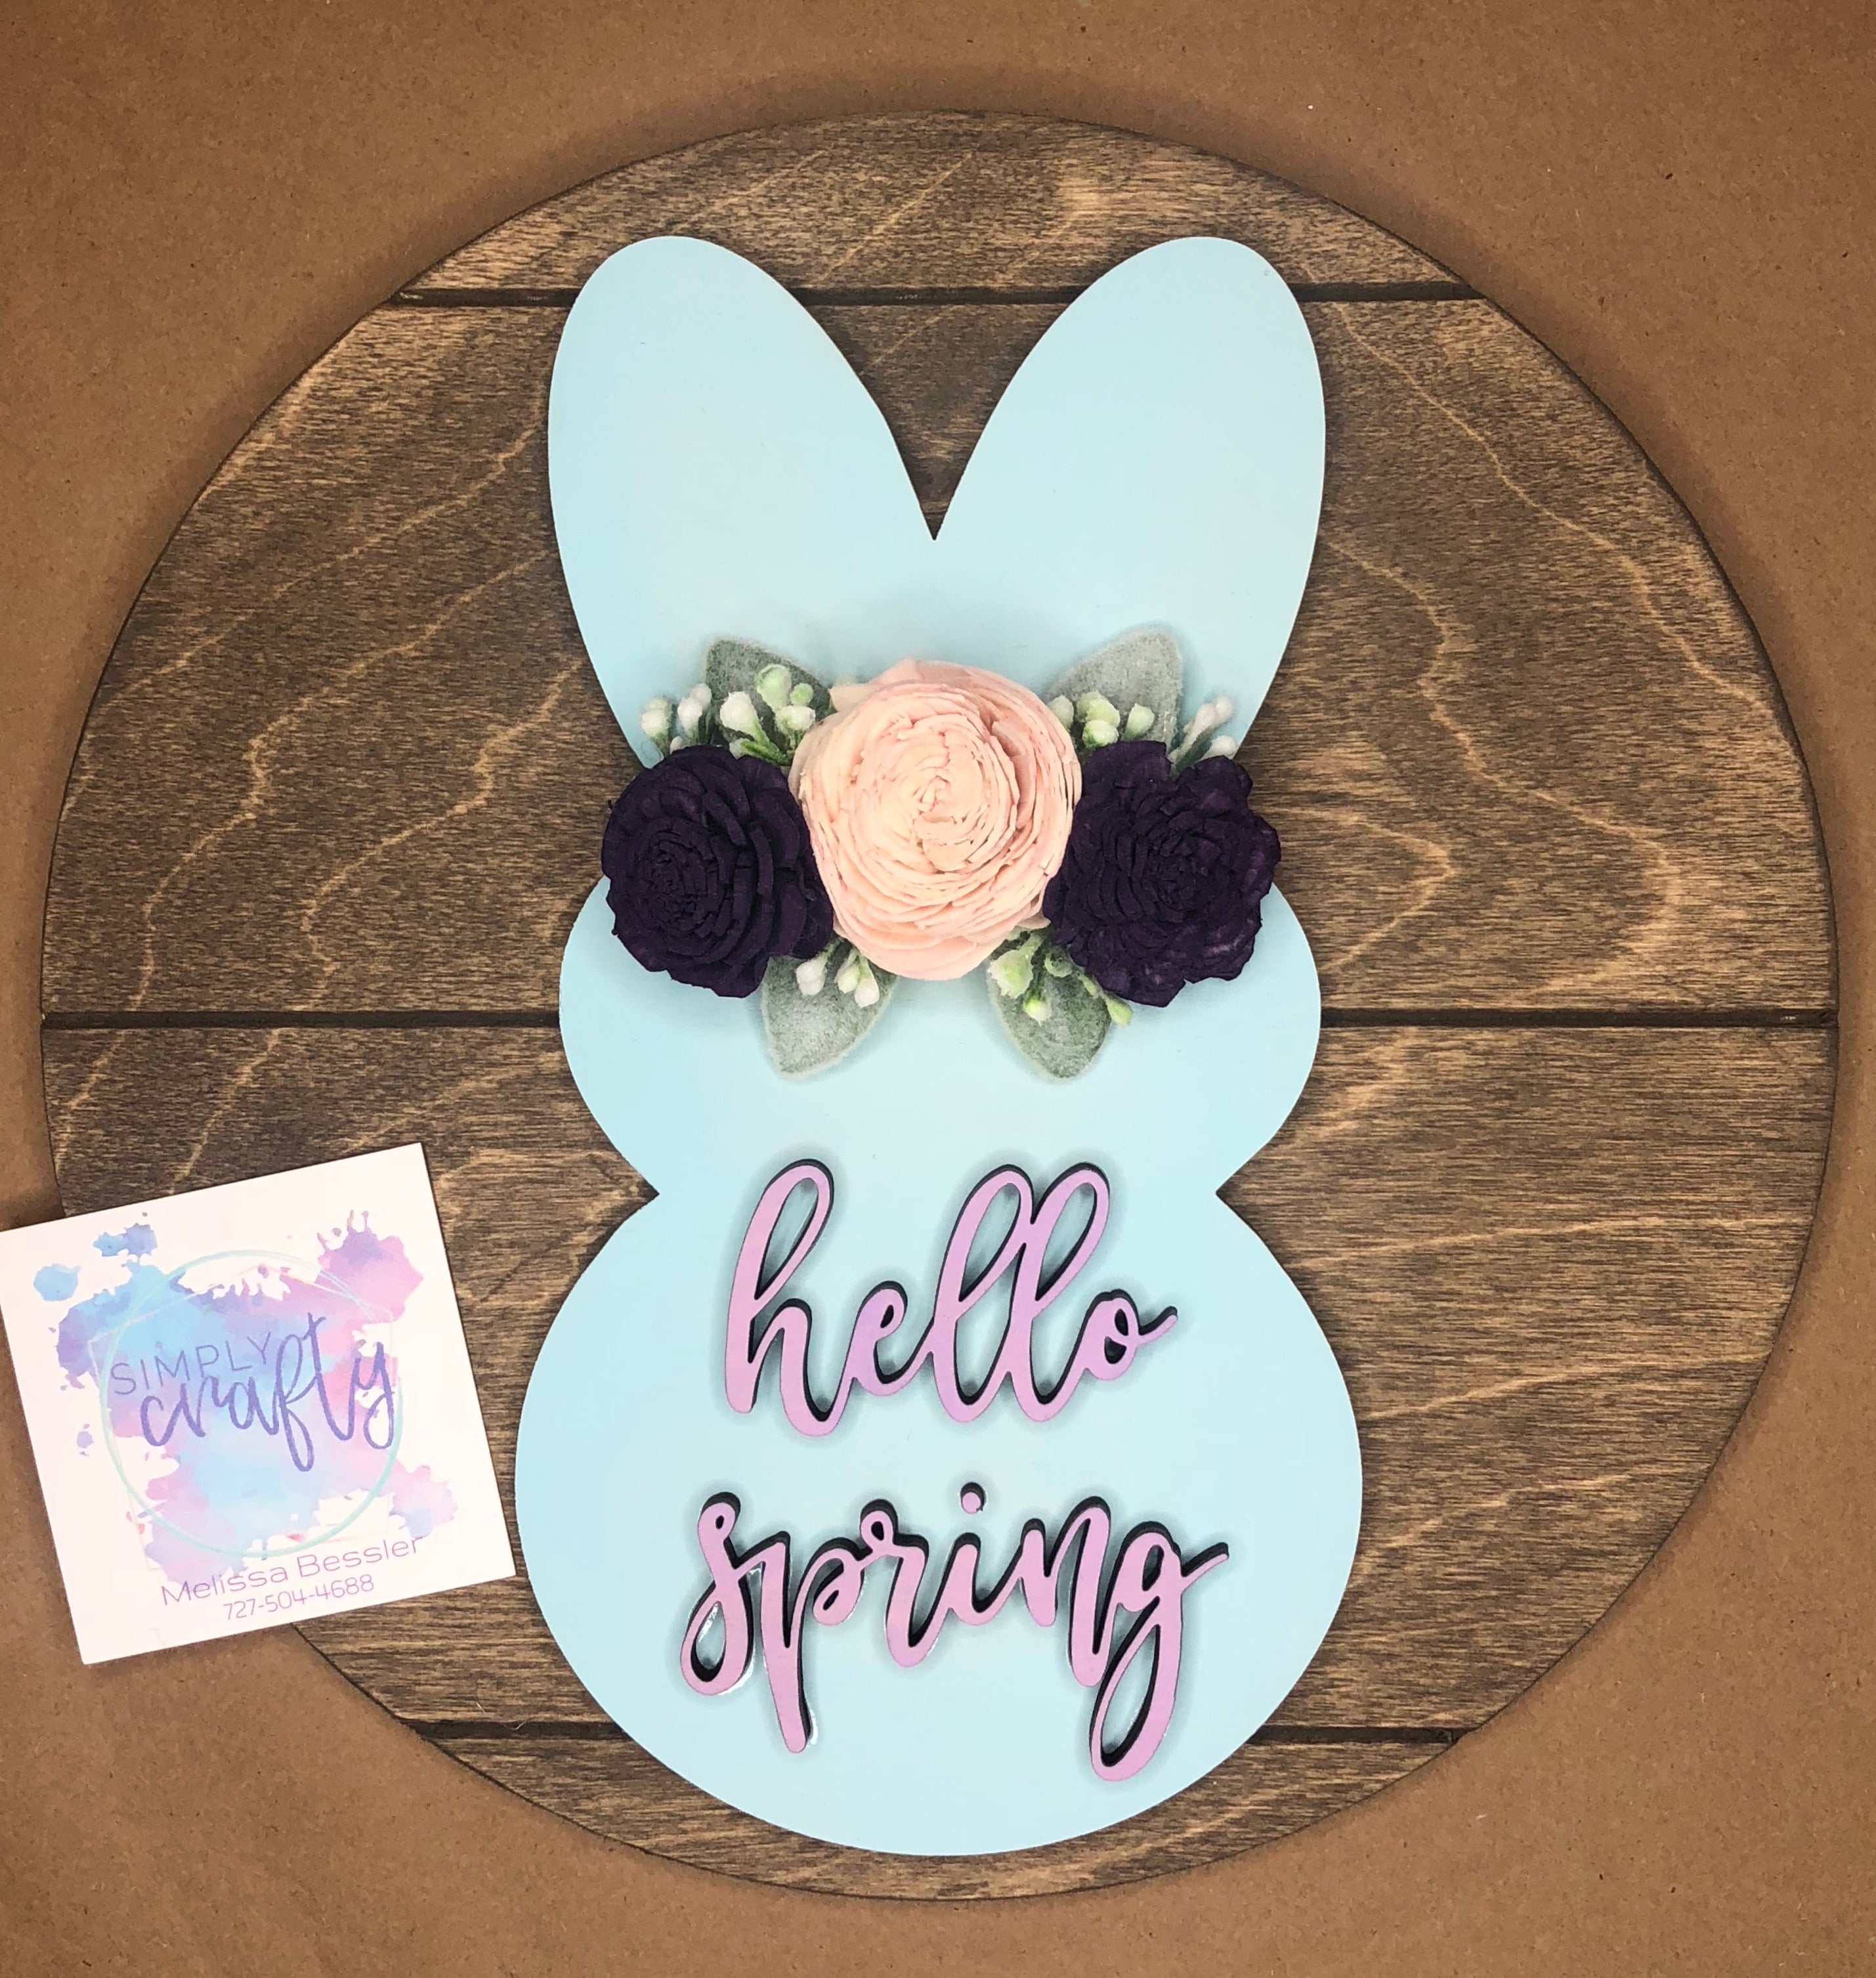 10" Bunny Silhouette with Wood Flowers